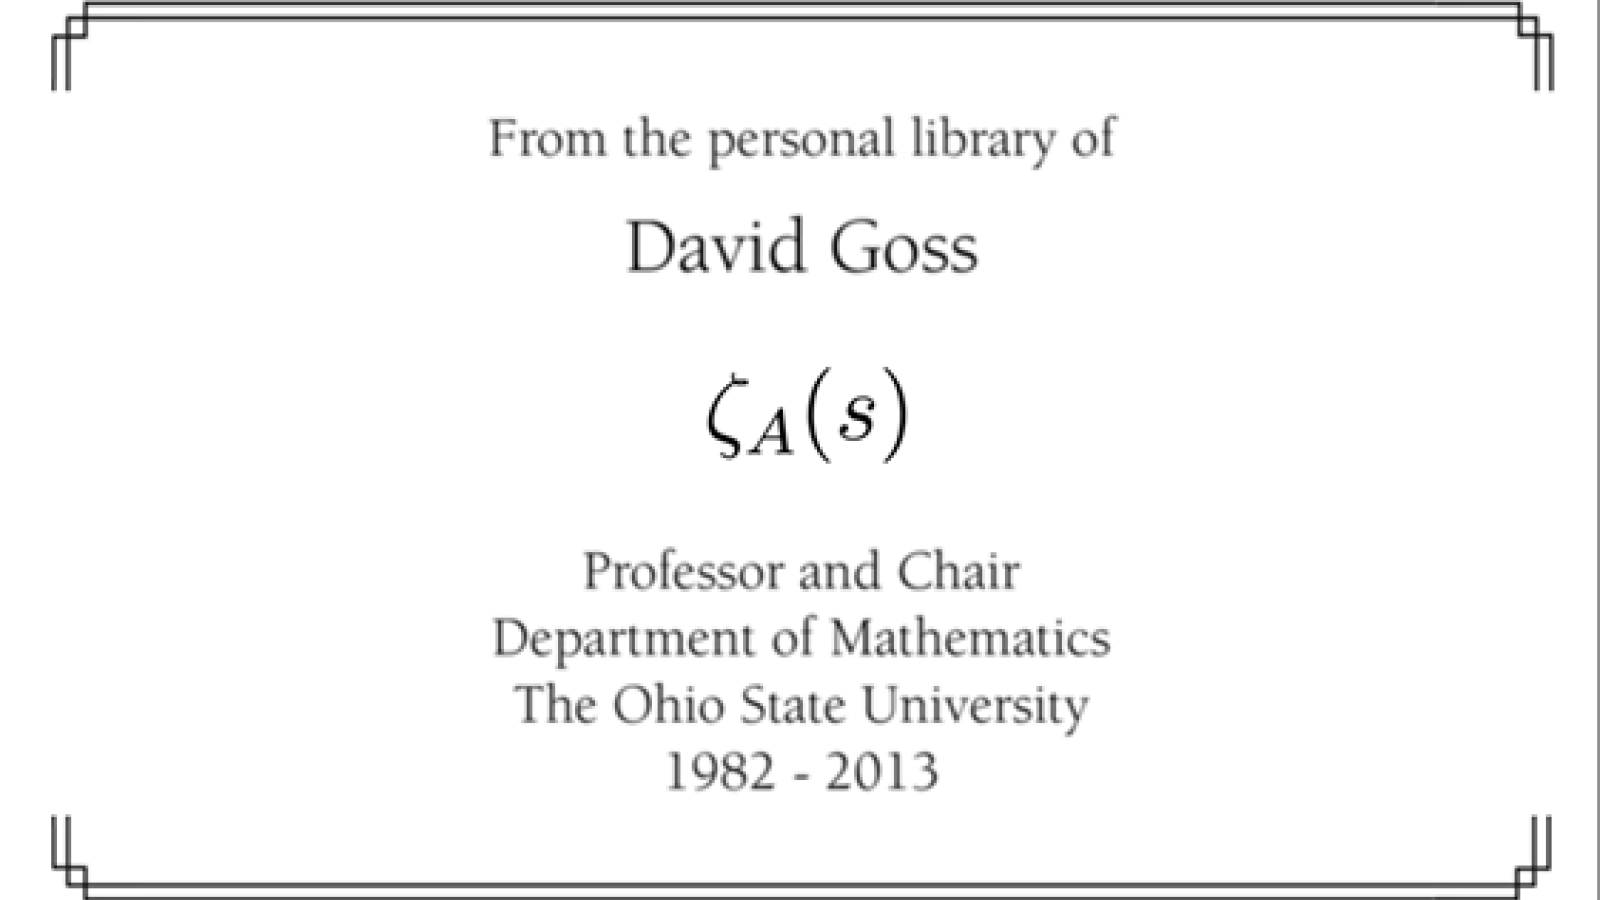 From the personal library of David Goss, Professor and Chair, Department of Mathmatics at Ohio State, 1982 to 2013